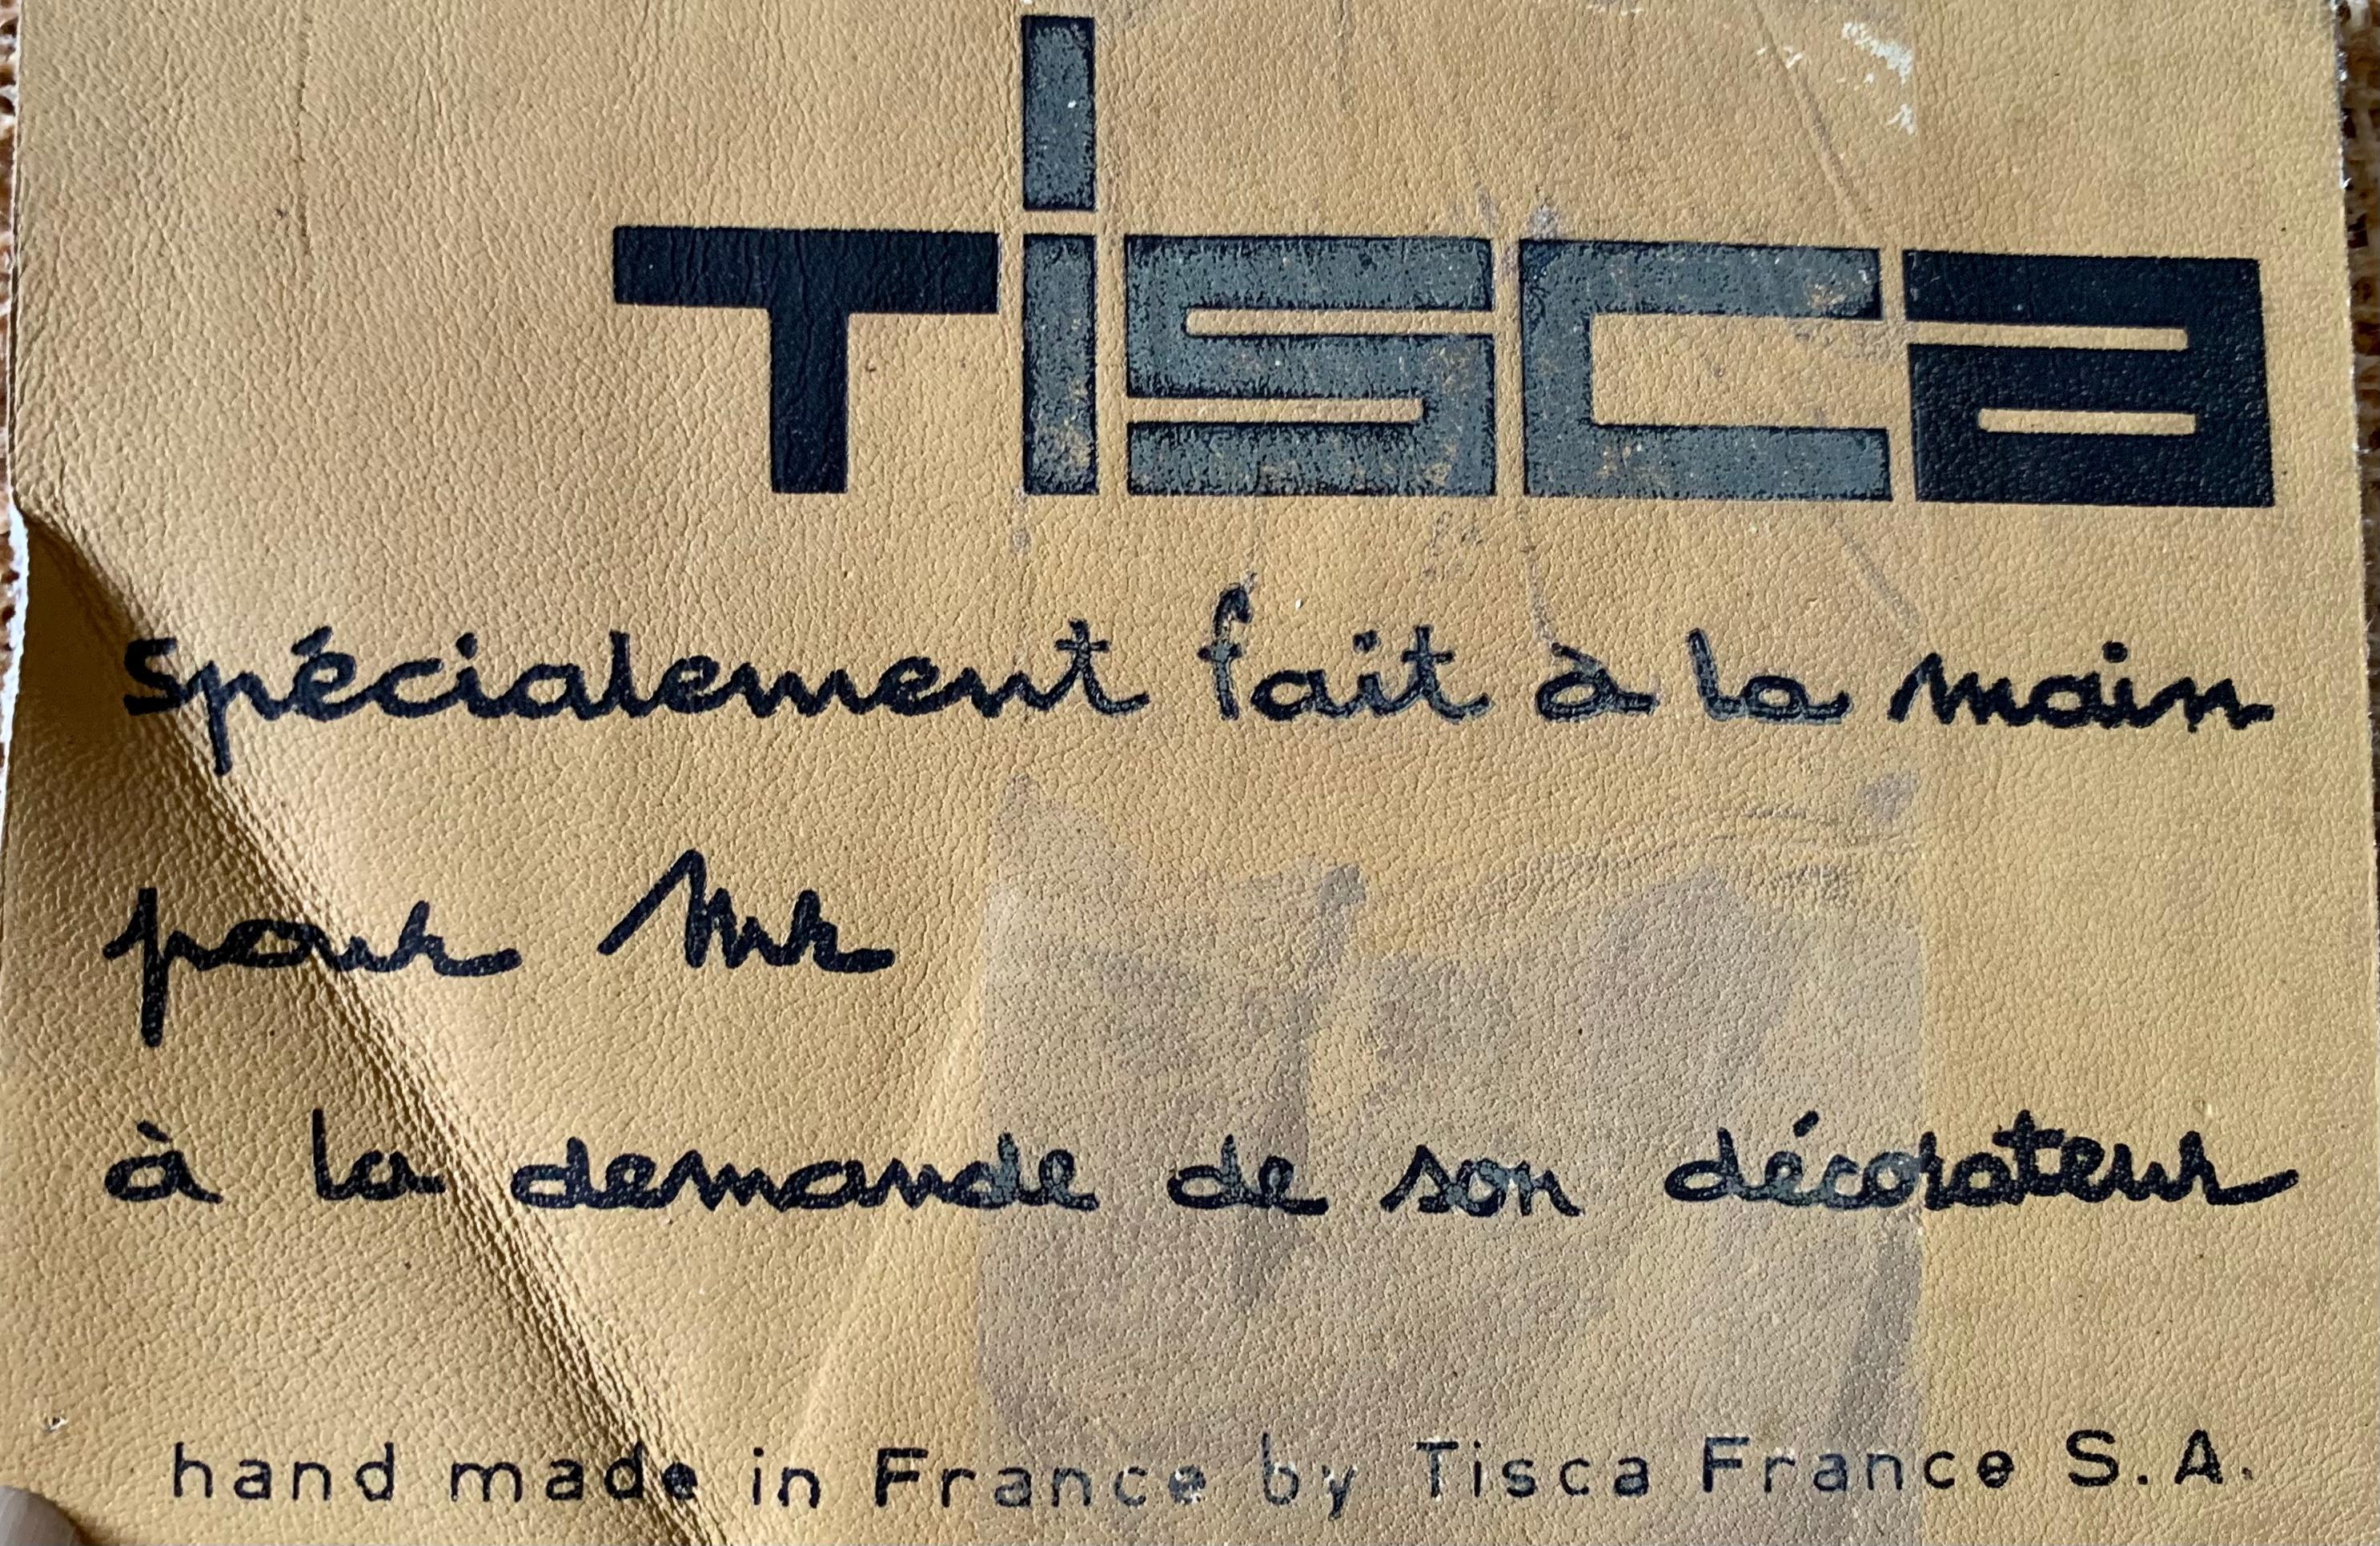 French Mid-Century Modern Tisca Hand Made in France Ettore Sotsass Fine Wool Carpet For Sale